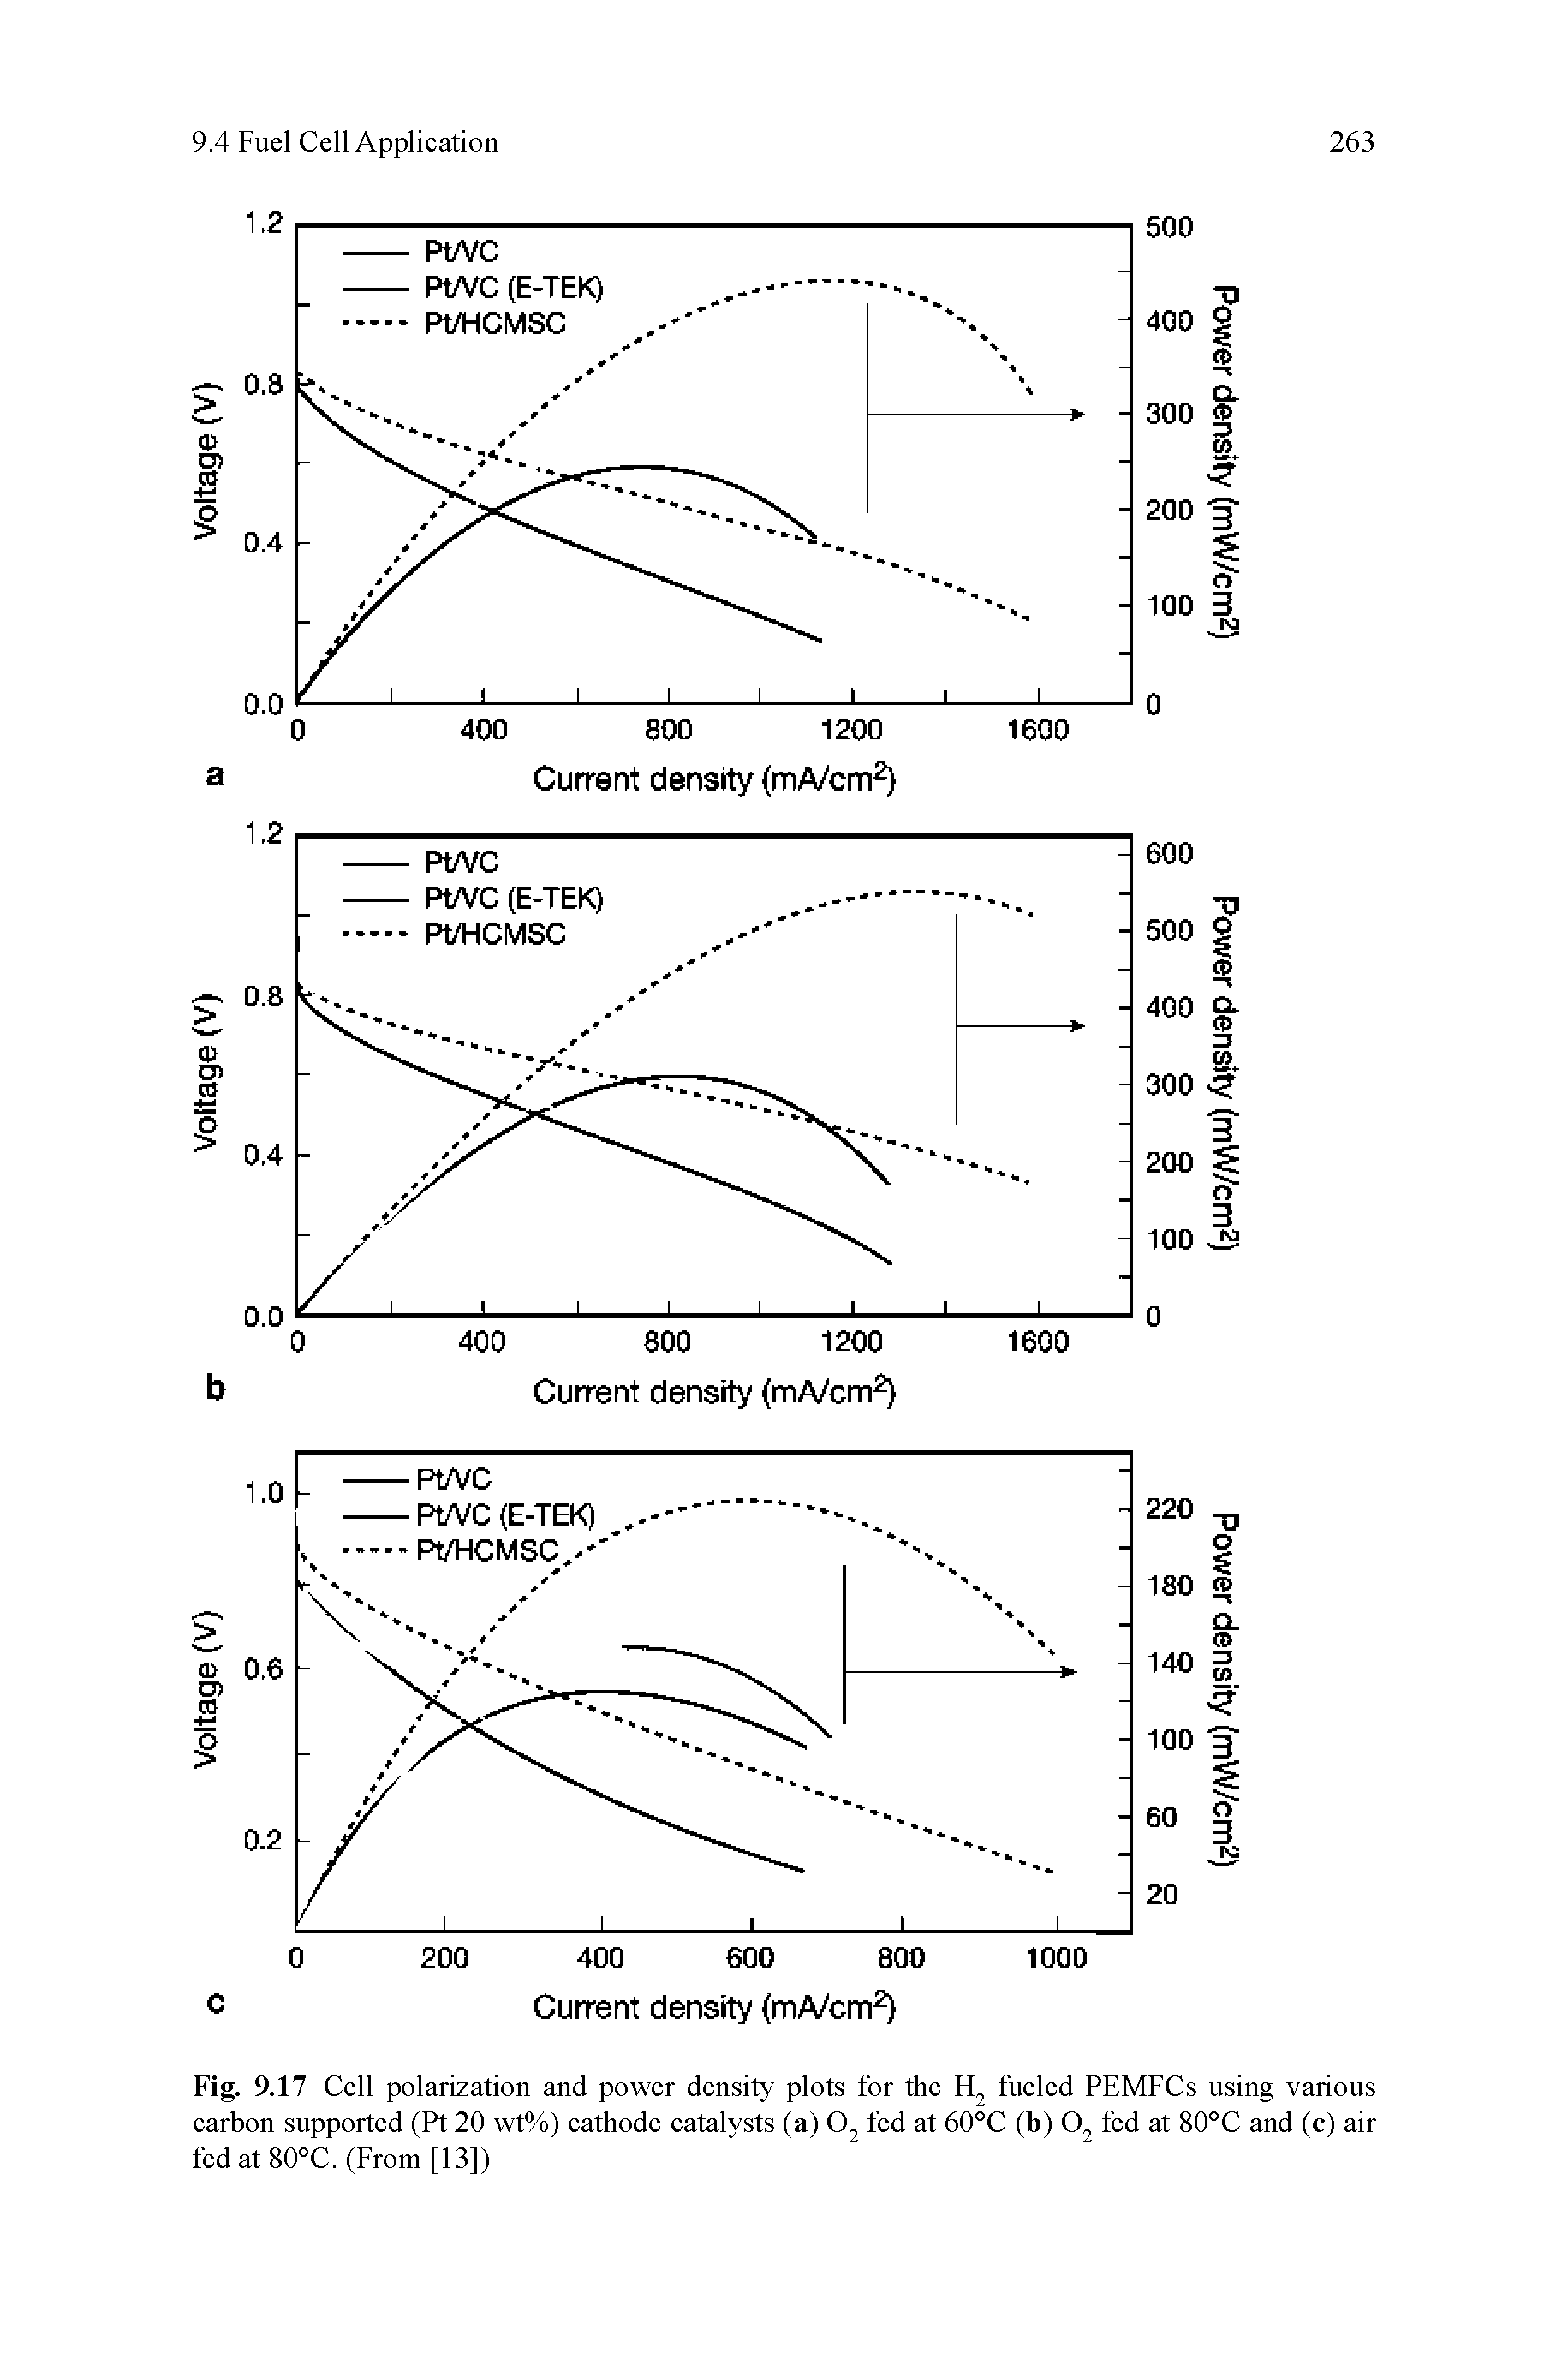 Fig. 9.17 Cell polarization and power density plots for the Fl fueled PEMFCs using various carbon supported (Pt 20 wt%) cathode catalysts (a) fed at 60°C (b) fed at 80°C and (c) air fedat80°C. (From [13])...